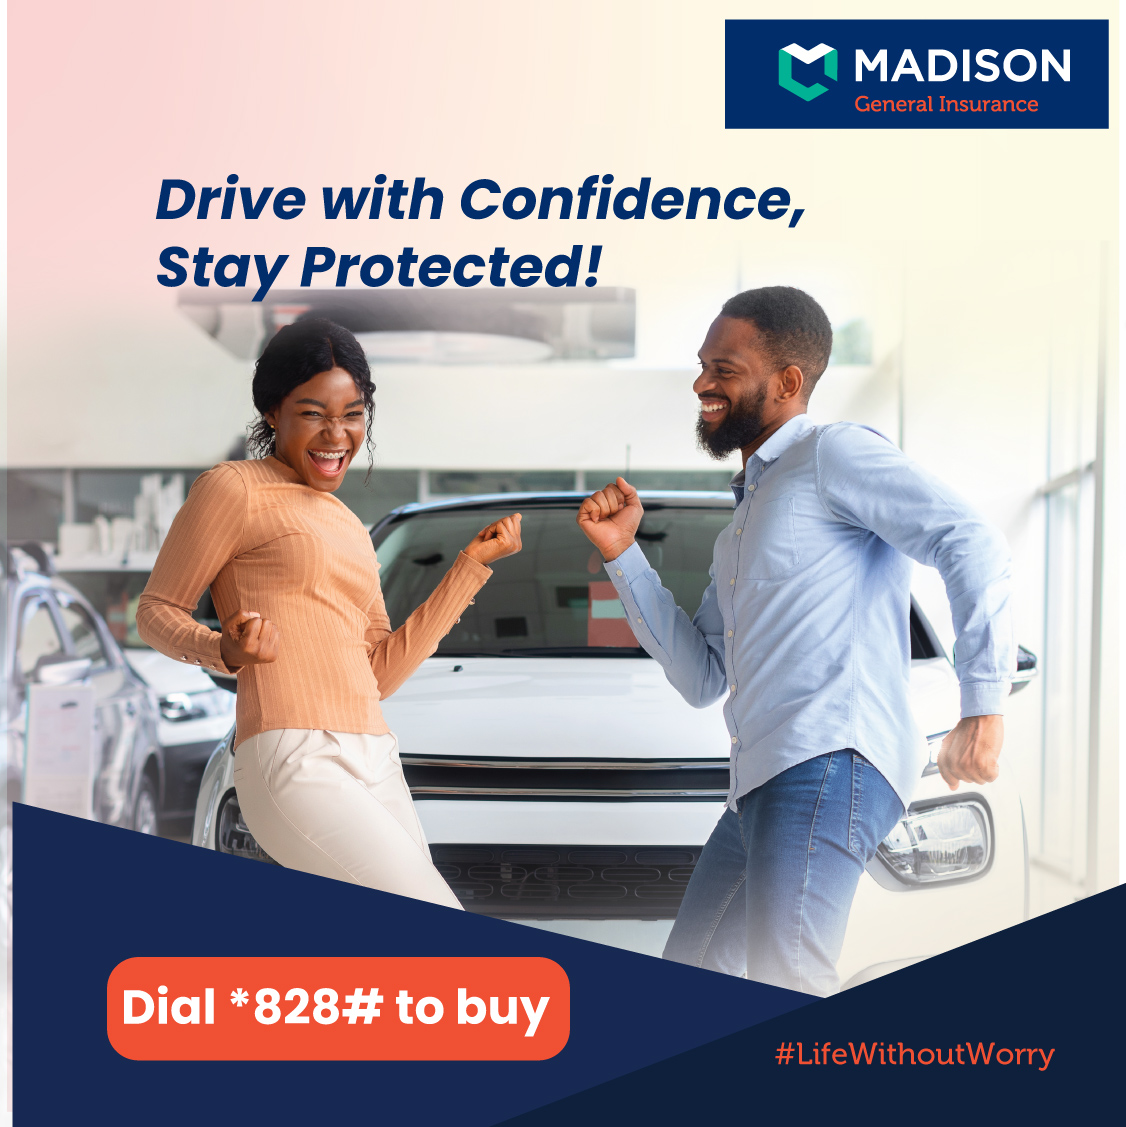 No one does motor insurance like we do!
Affordable Premium, Maximum Coverage - Our motor private insurance offers excellent value for your money.
 Dial *828# today!
#lifewithoutworry #motorinsurance #drivesafe #drivewithoutworry